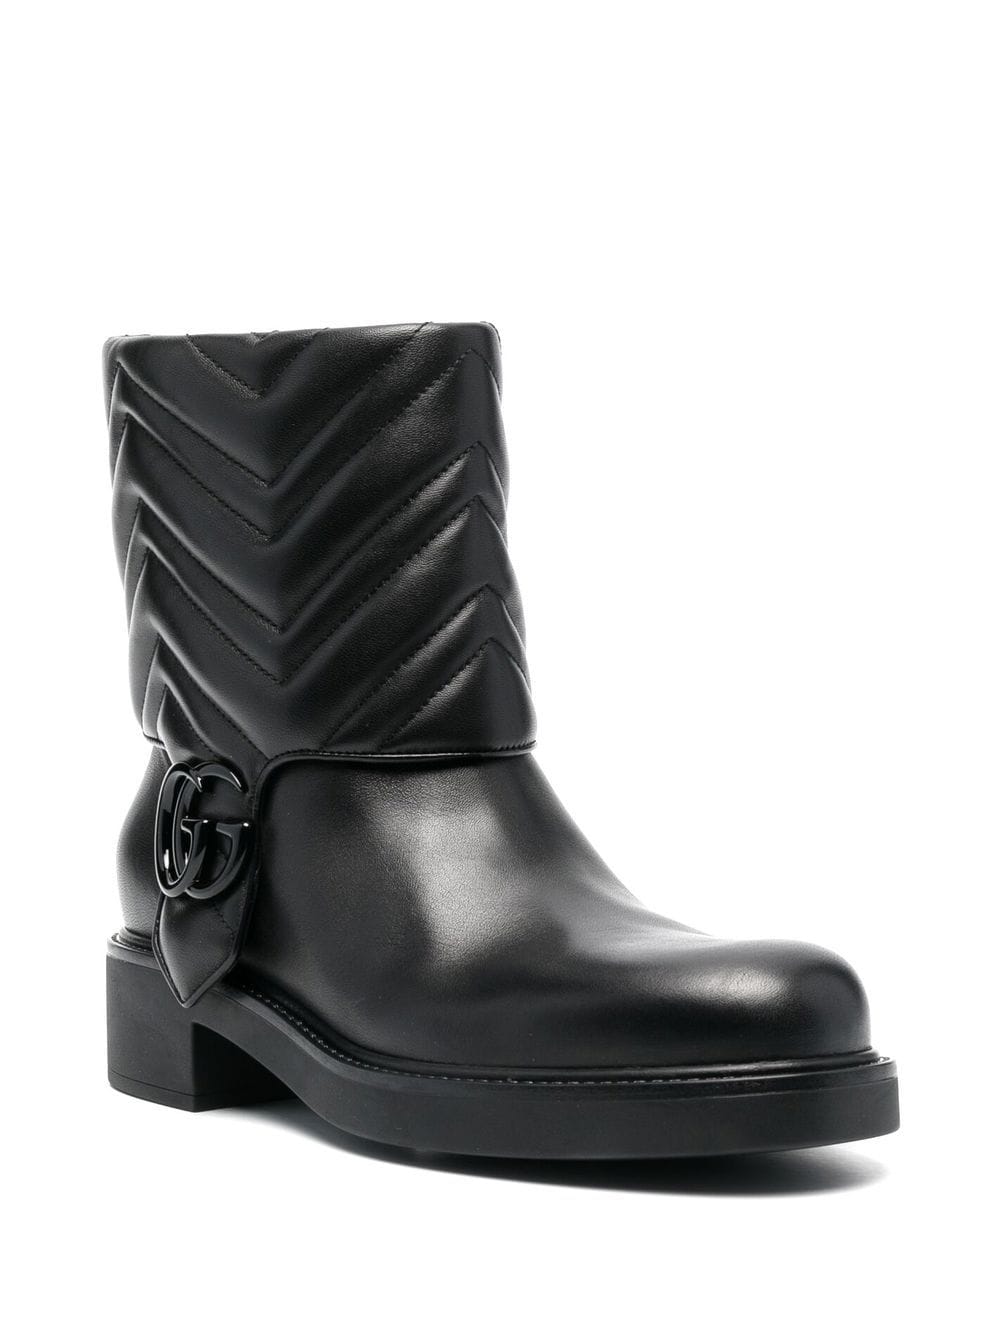 GG LEATHER ANKLE BOOTS